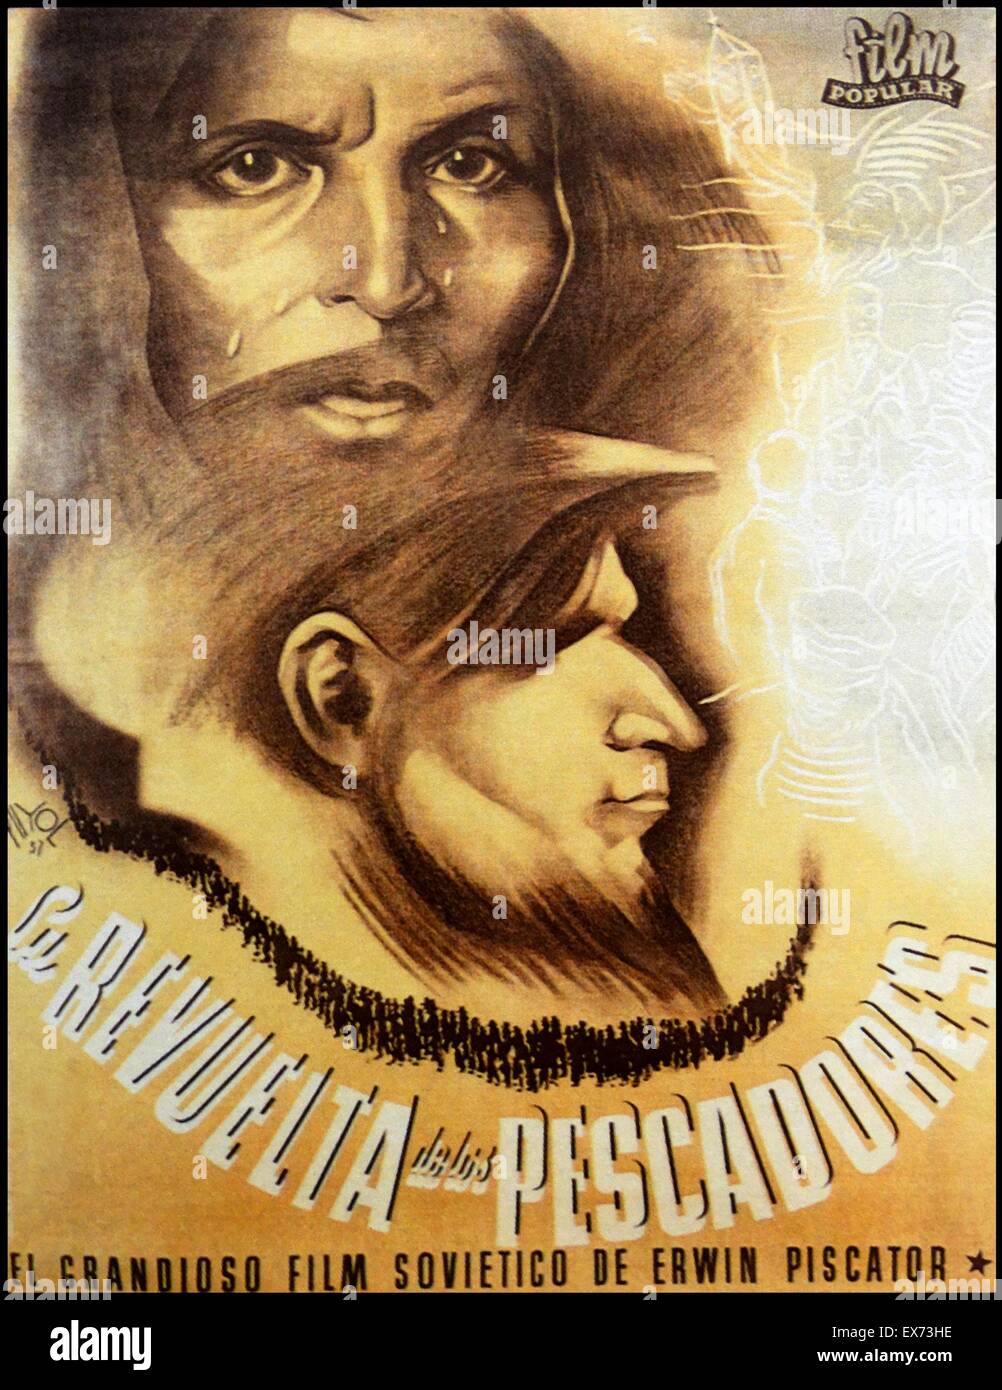 1936 Poster for the Spanish edition of the Soviet epic film, Revolt of the Fishermen by the film director, Erwin Piscator 1934 Stock Photo